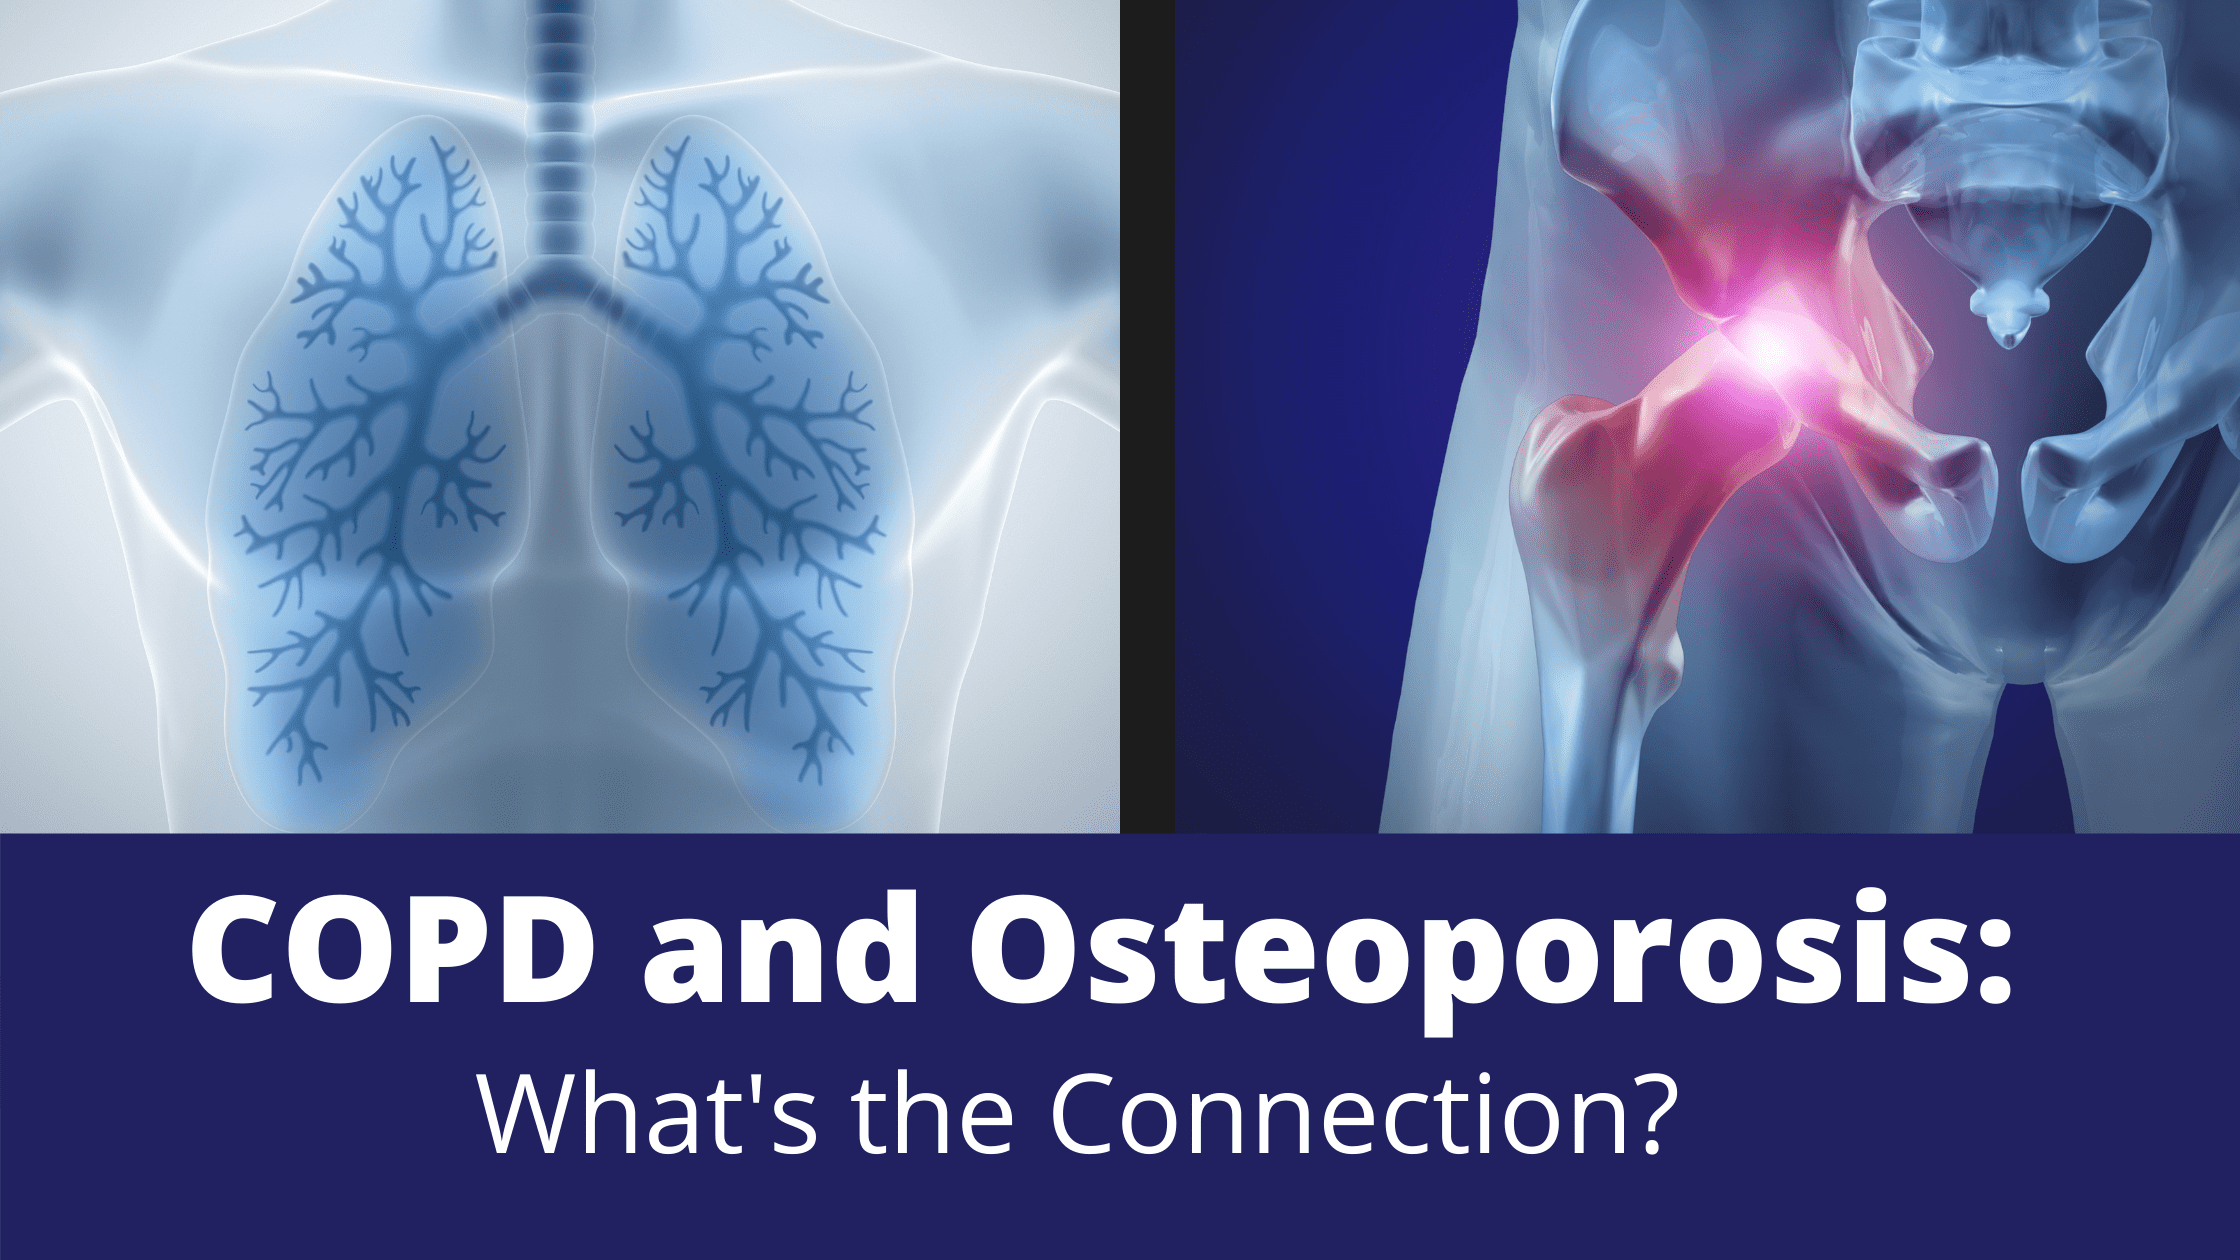 COPD and Osteoporosis